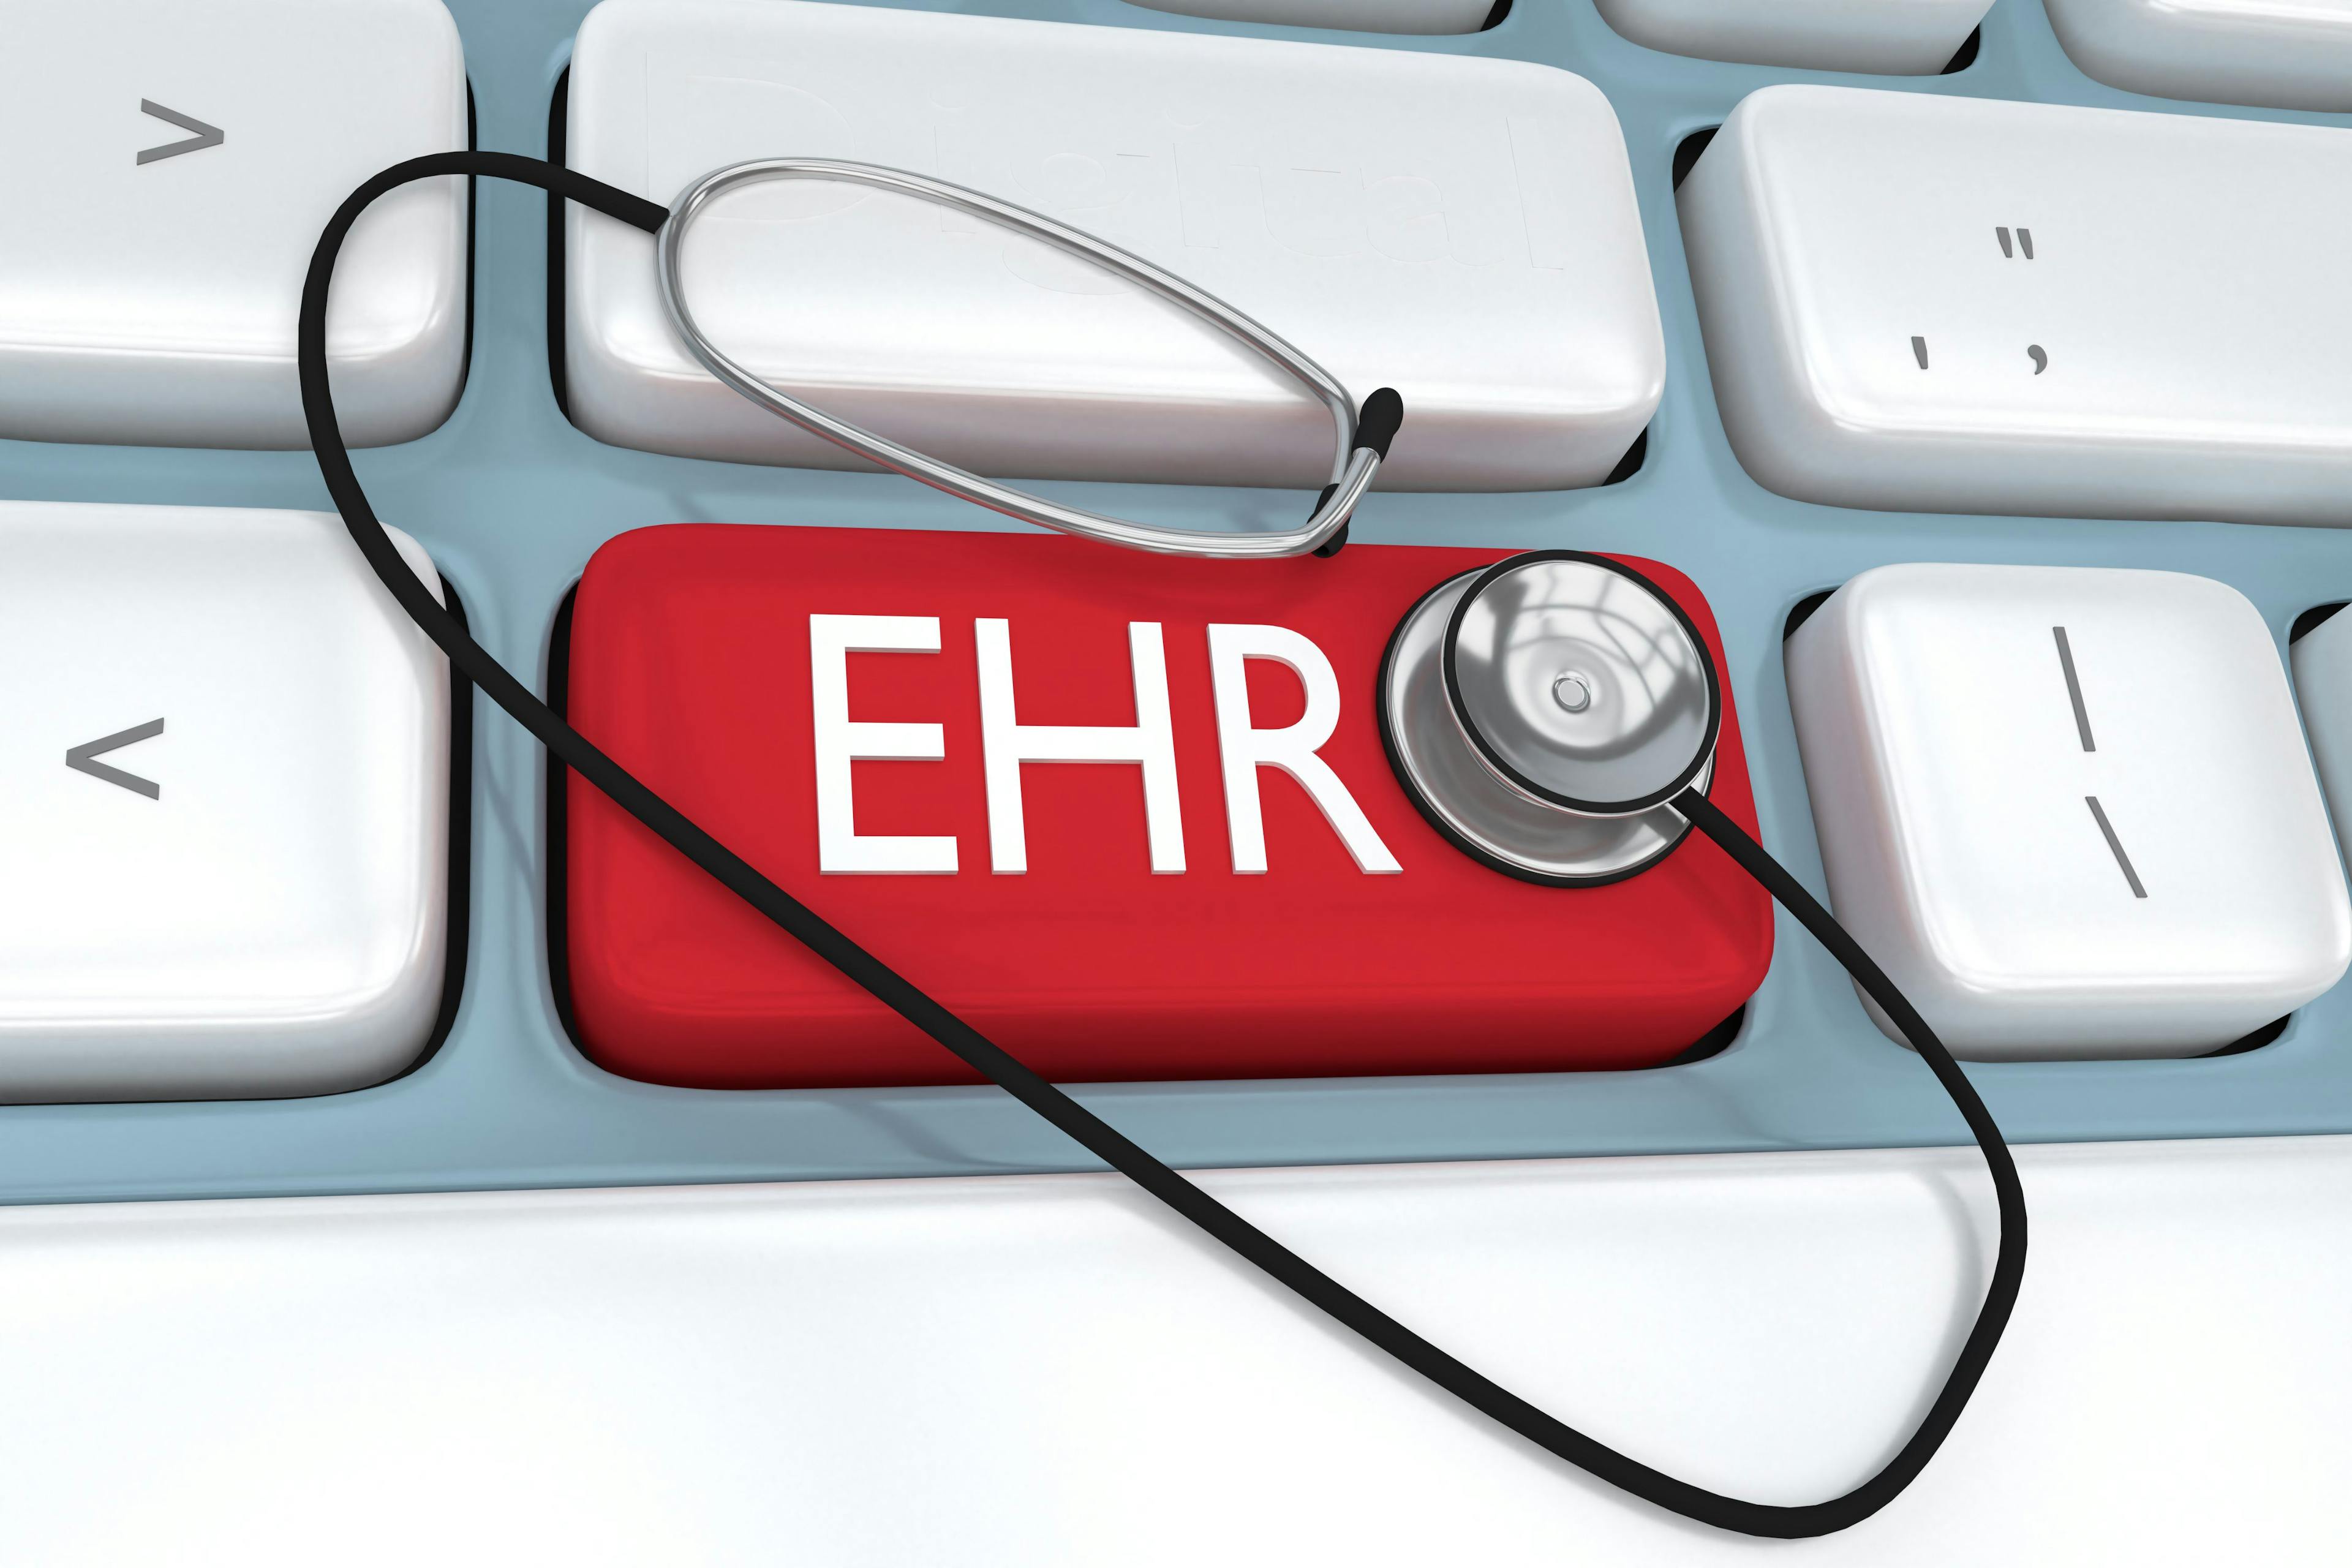 Three Ways to Optimize Your EHR